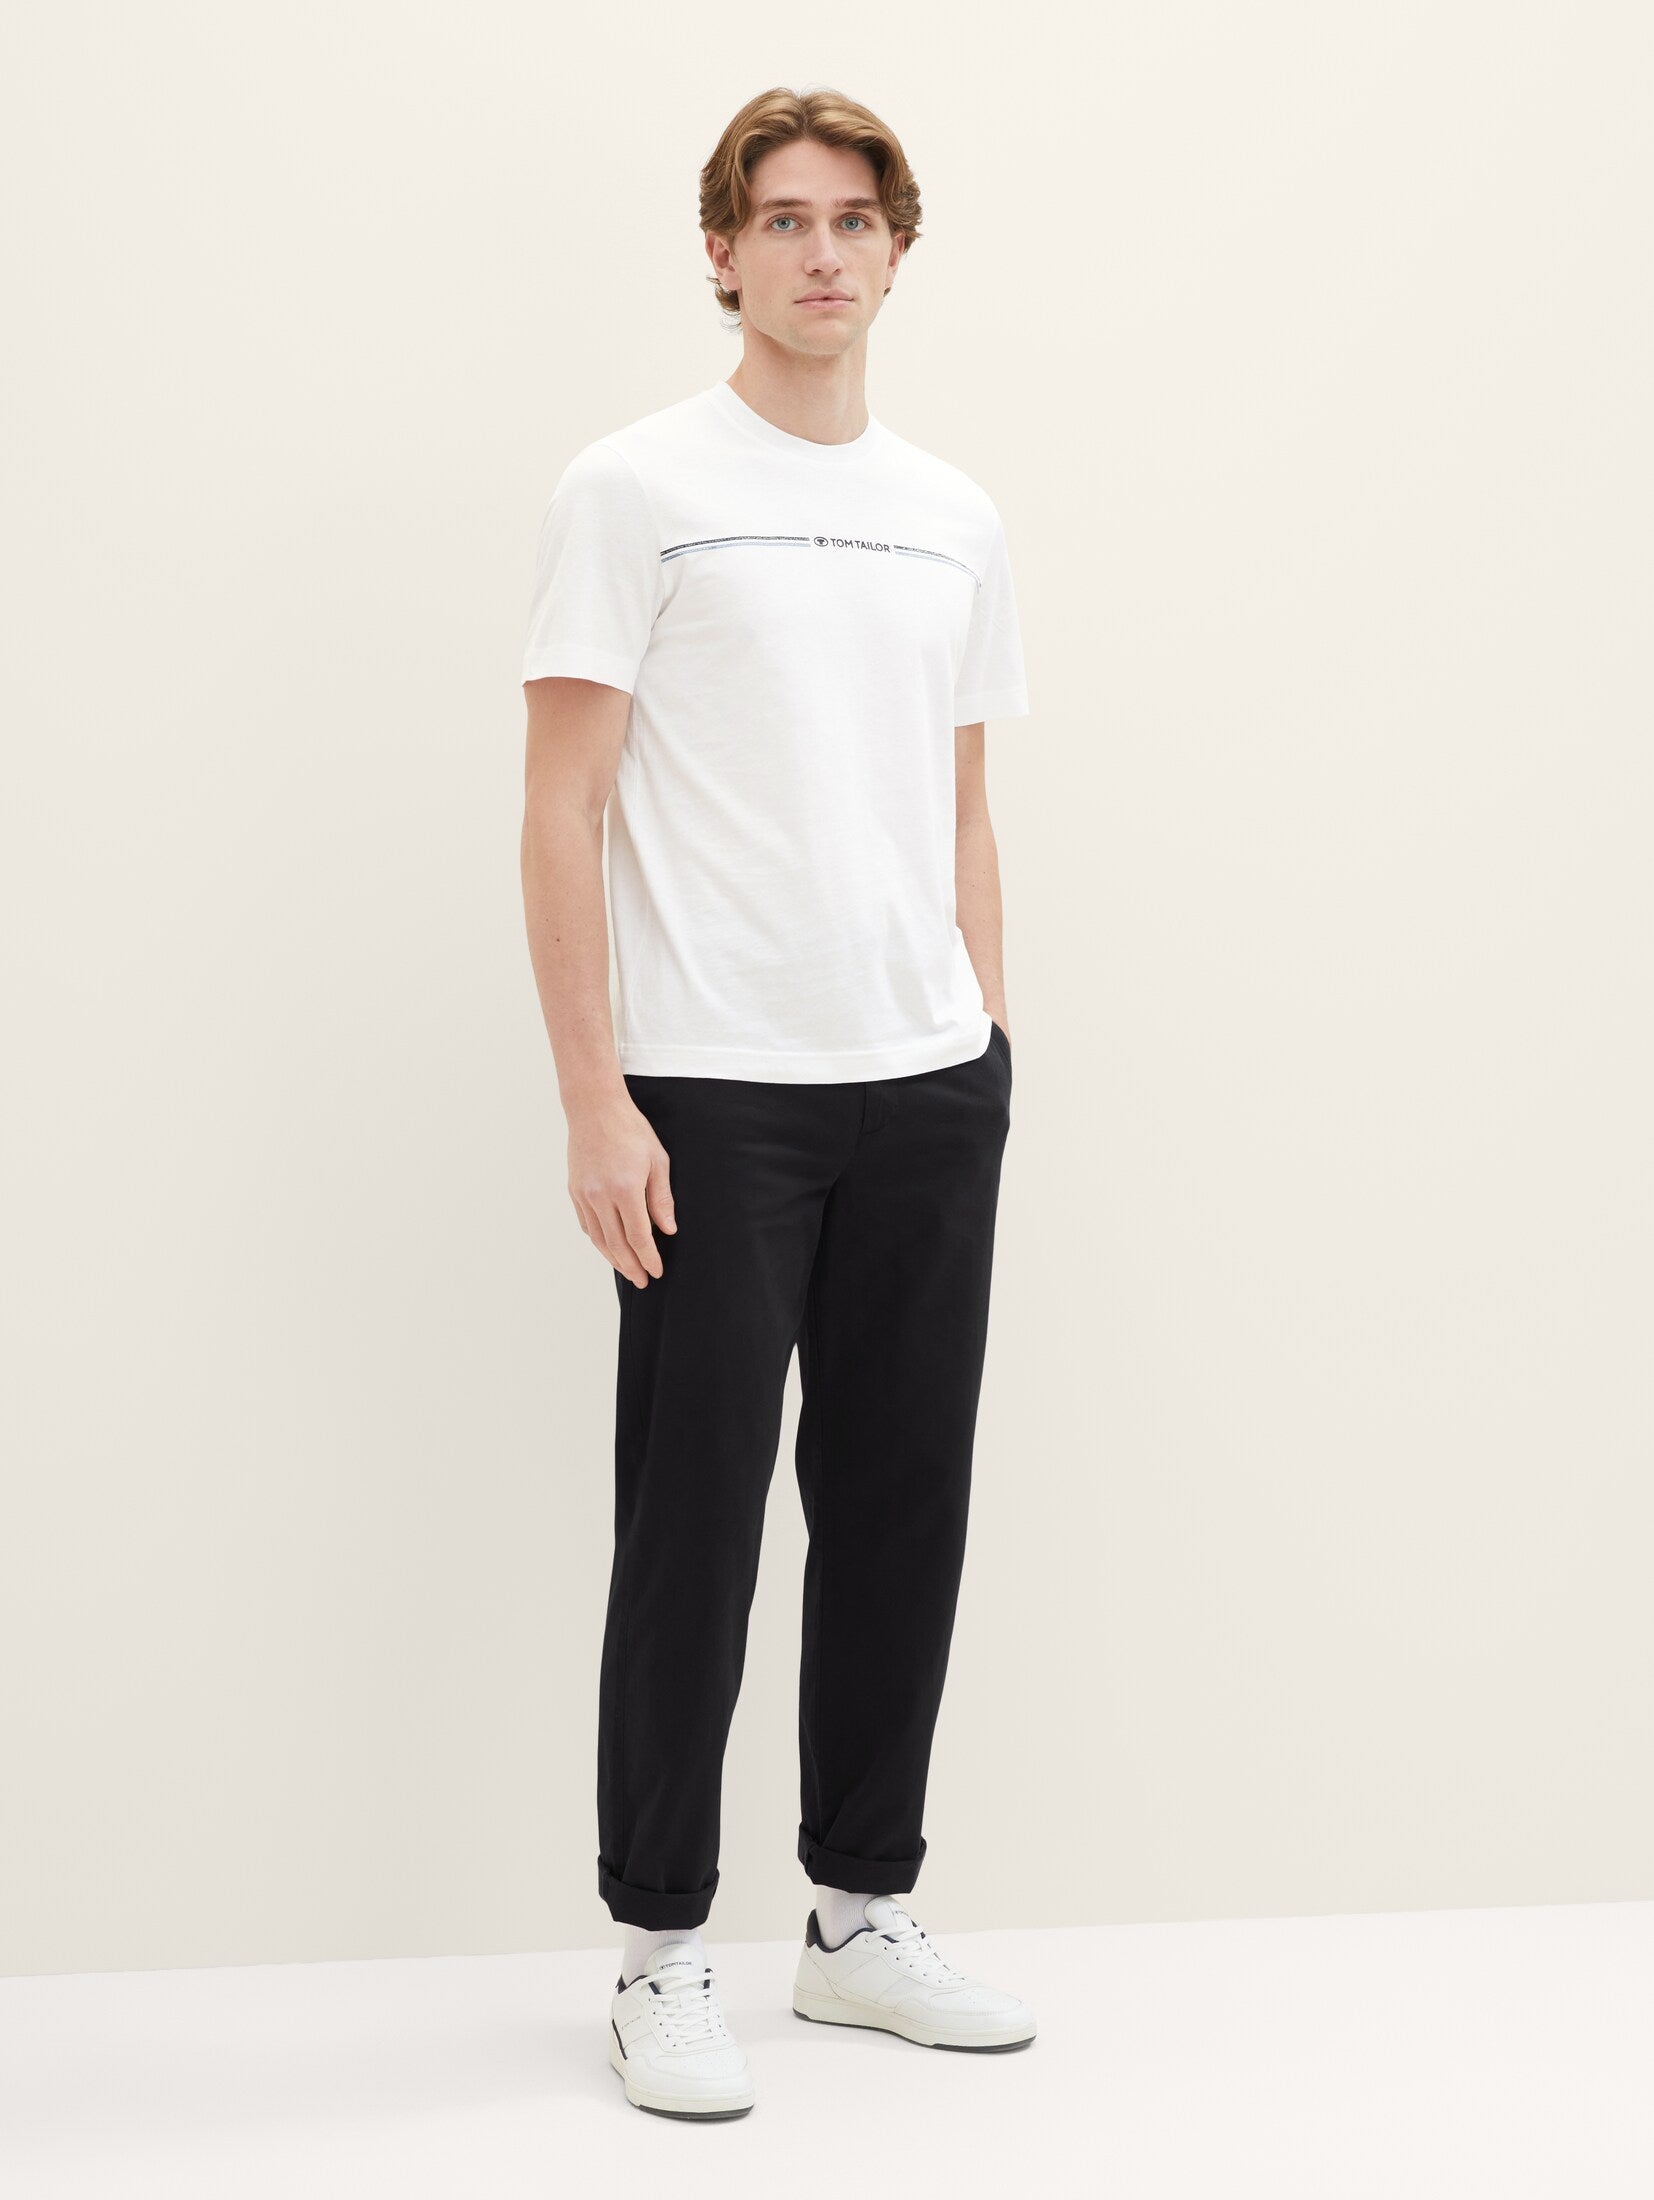 Tom Tailor White T-shirt With A Print